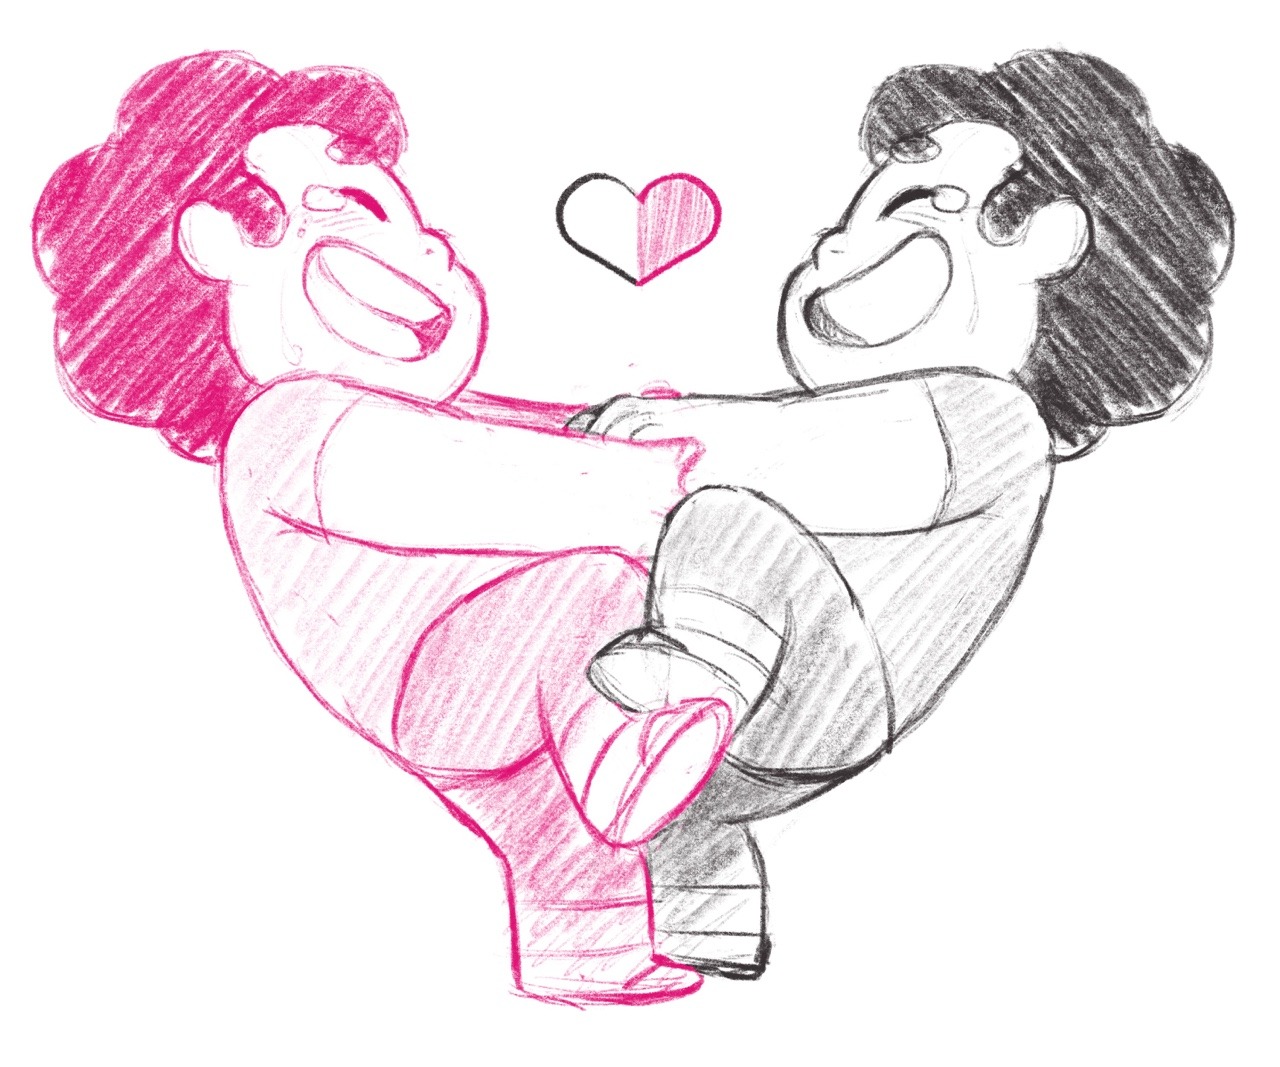 Hooman Steven standing on Gem Steven’s feet while they danced gave me so much life